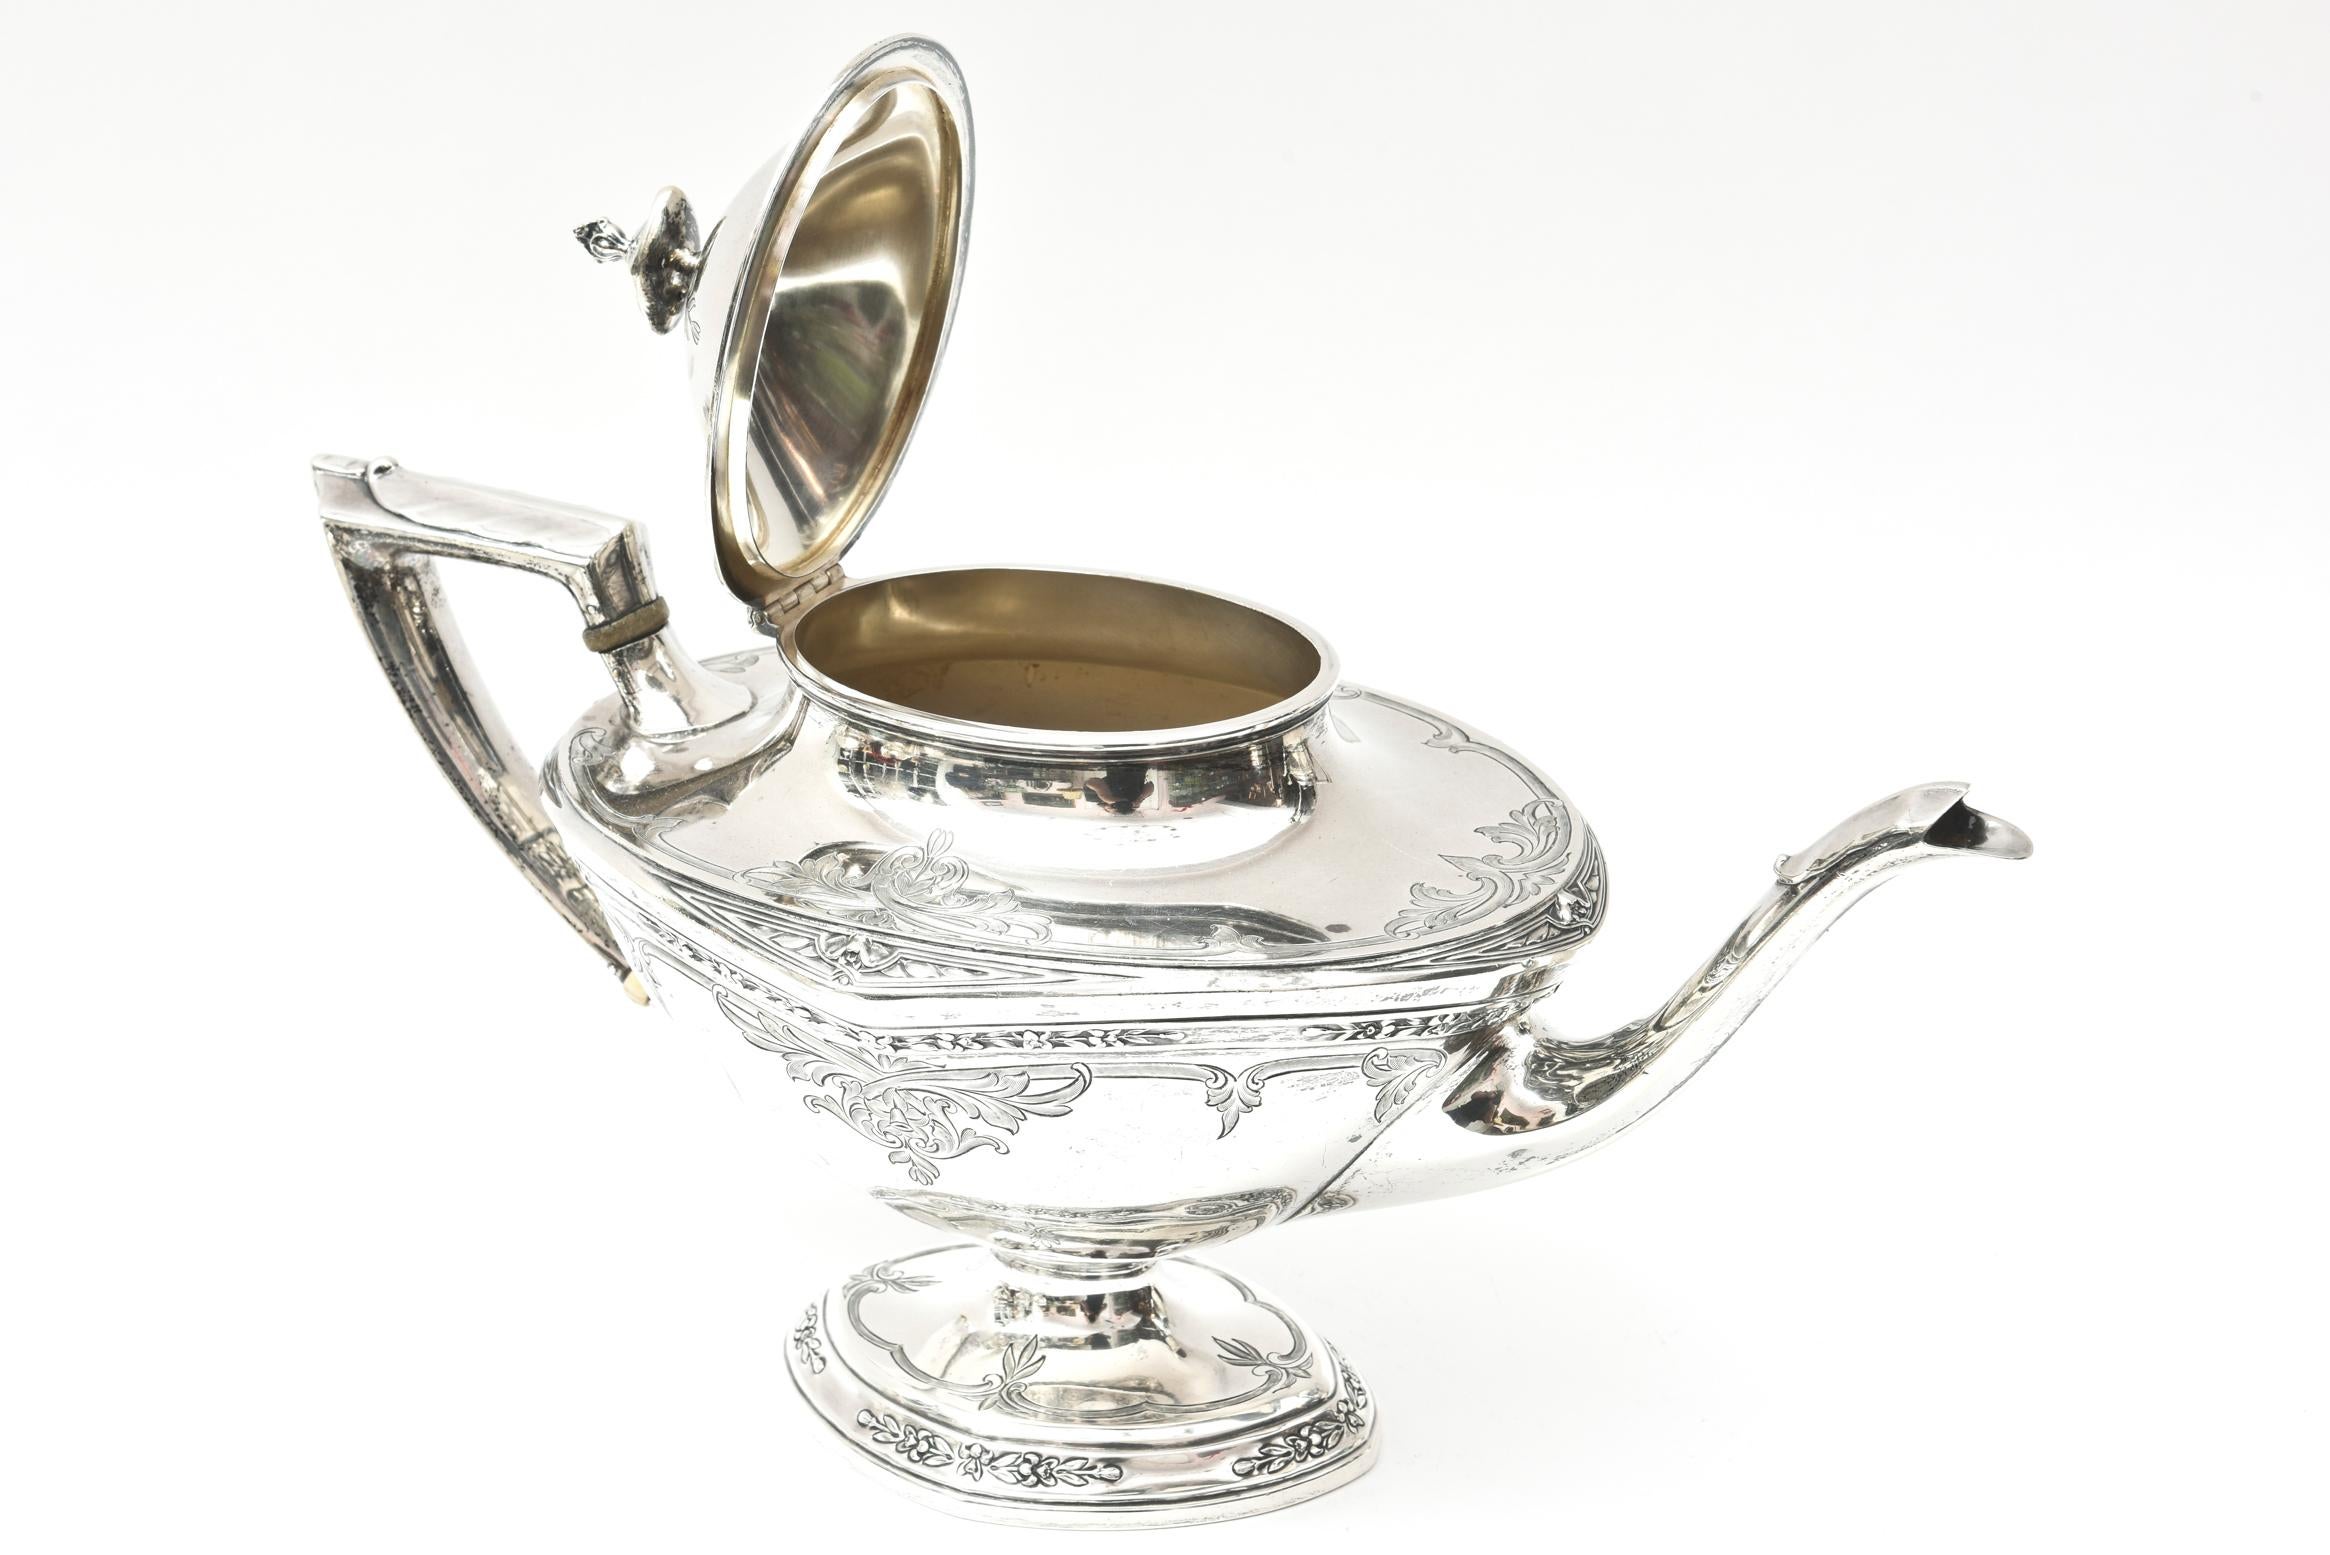 Hand-Crafted Sterling Tea and Coffee Service, American, Elegant and Well Chased